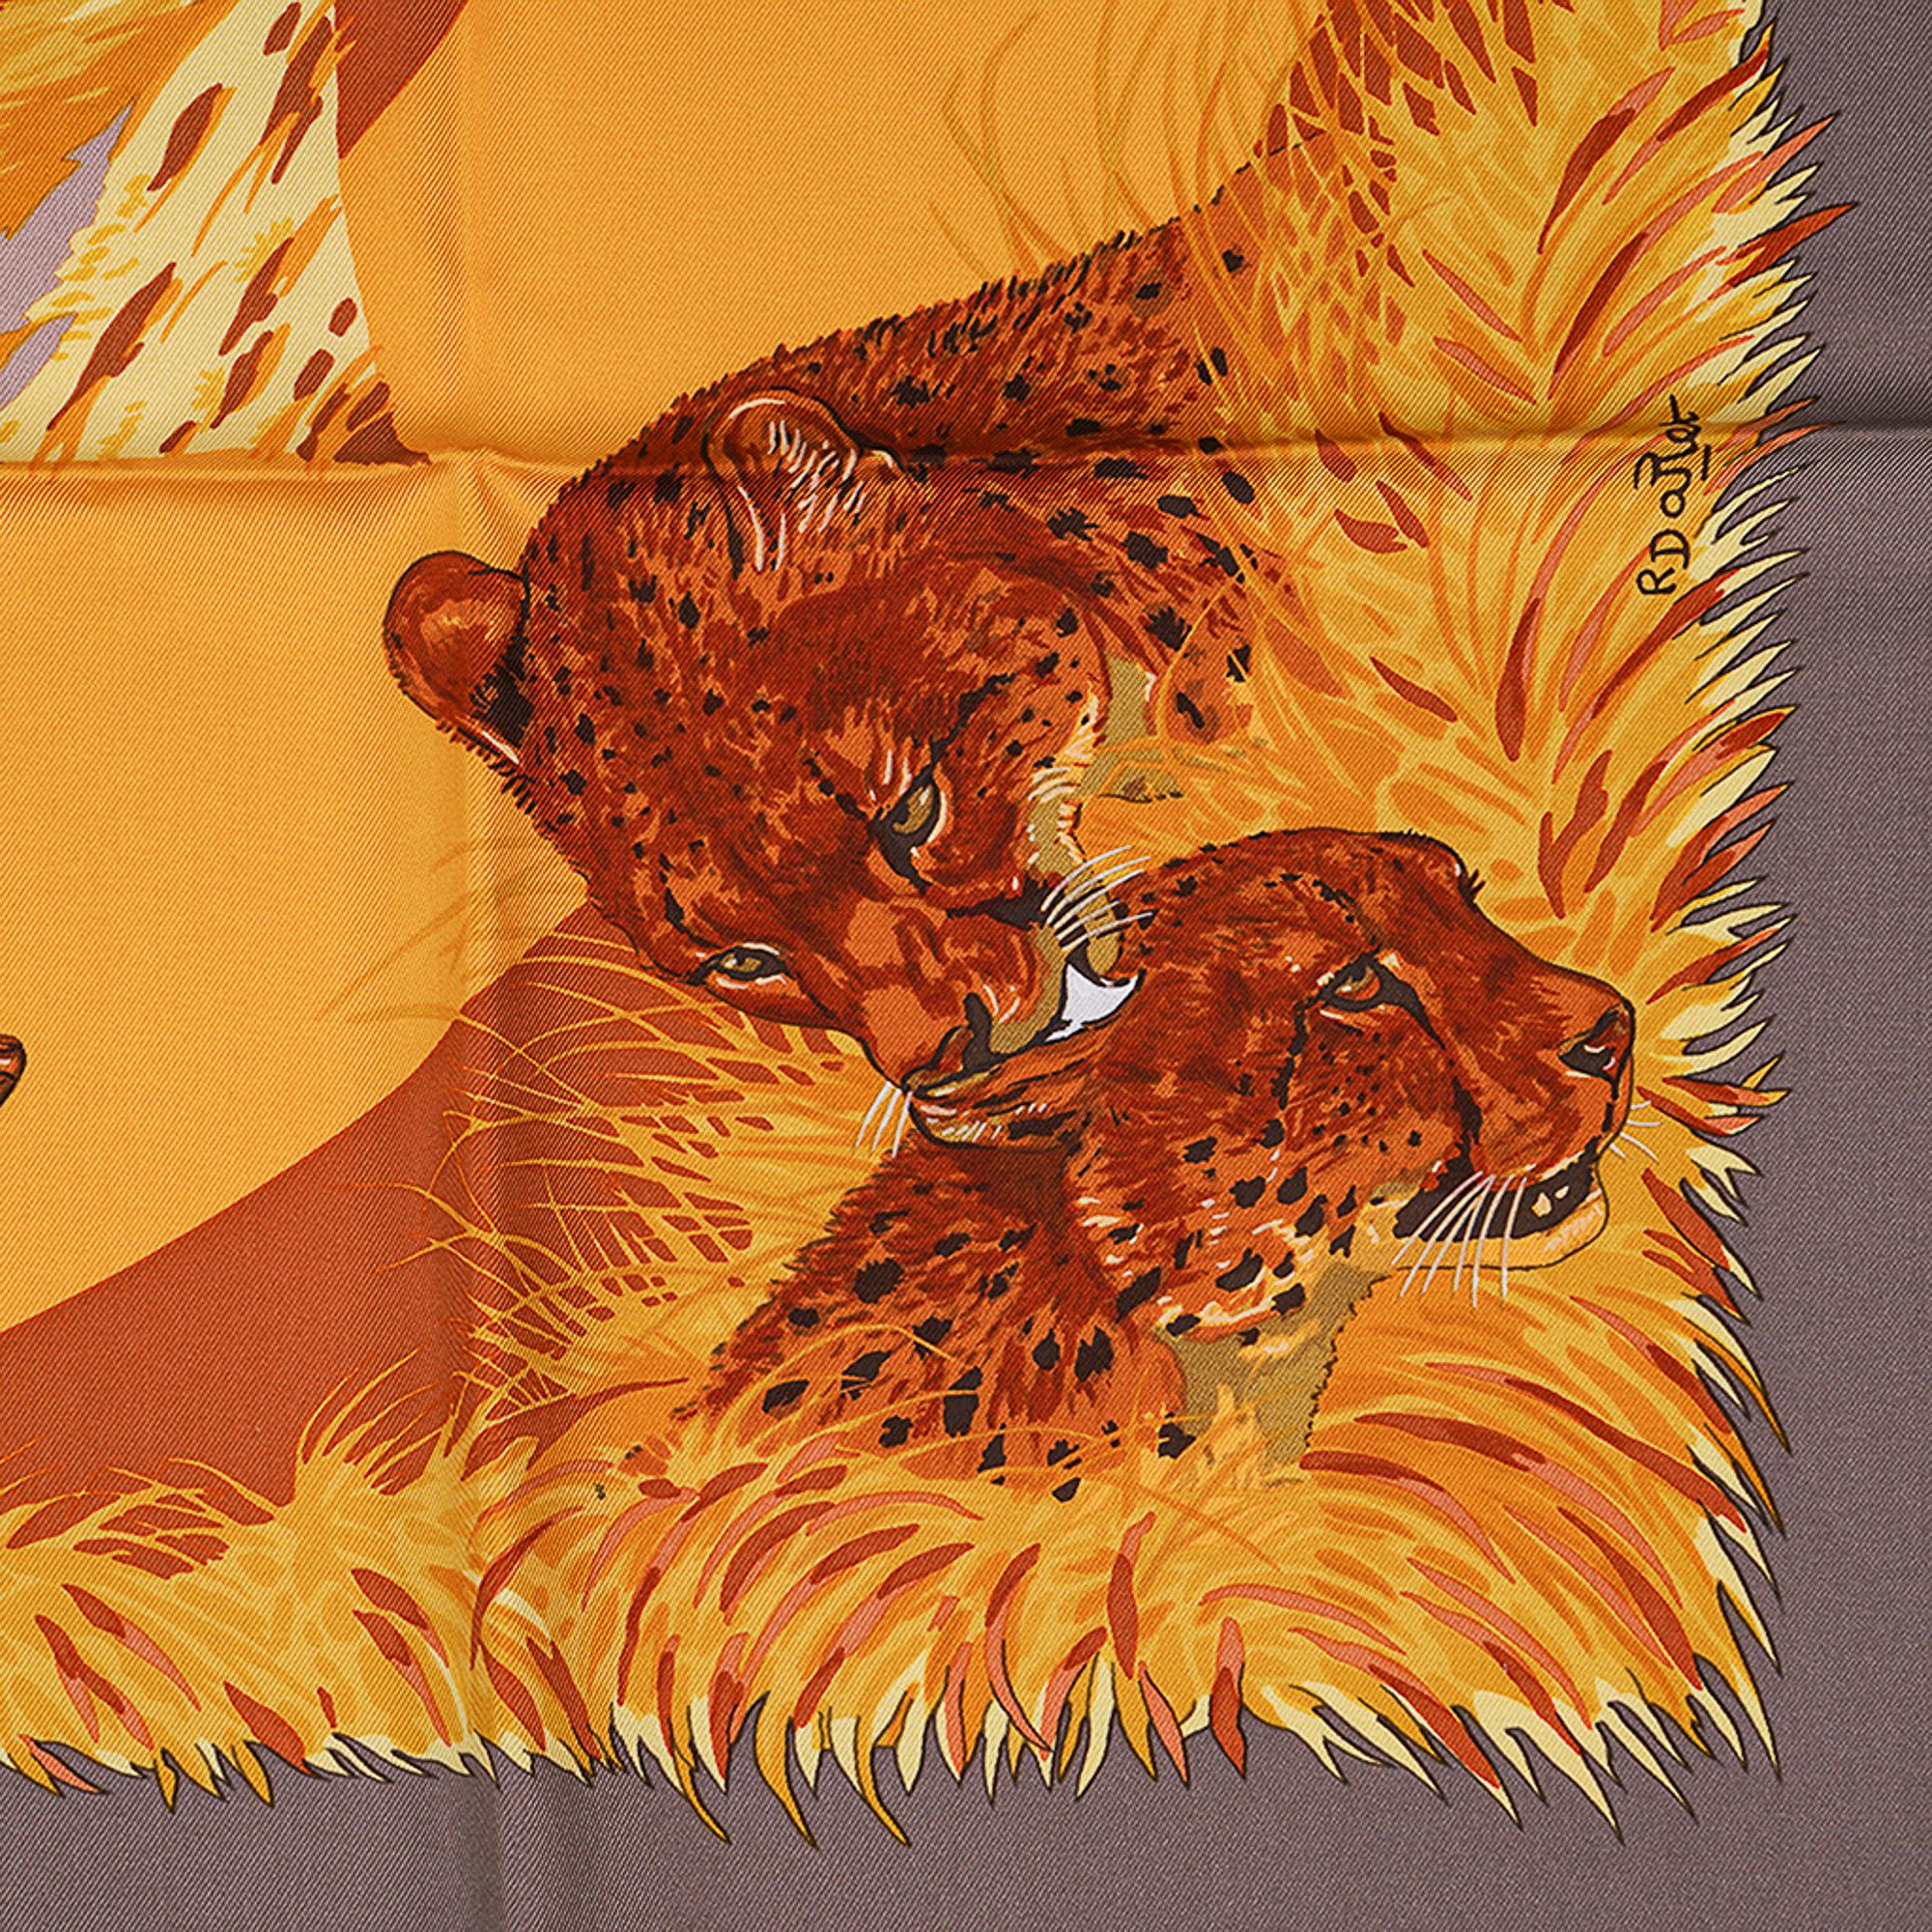 vintage Hermes Guepards scarf designed by Robert Dallet.
Featured in Vieille Or (Old Gold), Taupe and Marron colorway.
Depicts Cheetahs in various poses racing toward the center.
Made in France.
Signature hand rolled edge.
Comes with signature